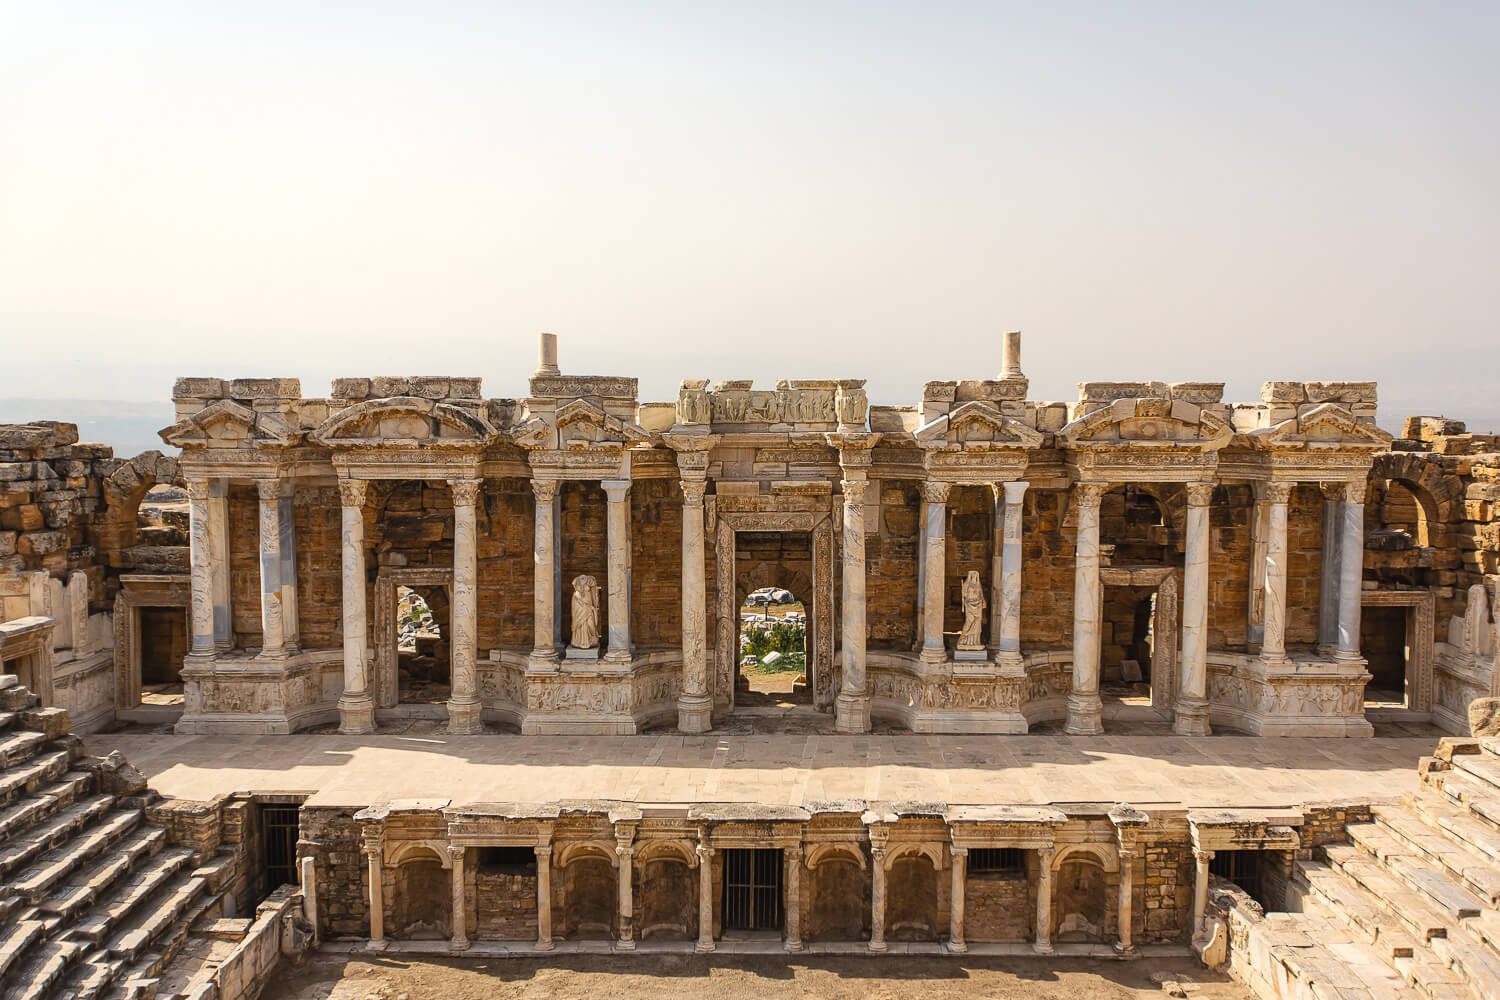 The theater in Hierapolis